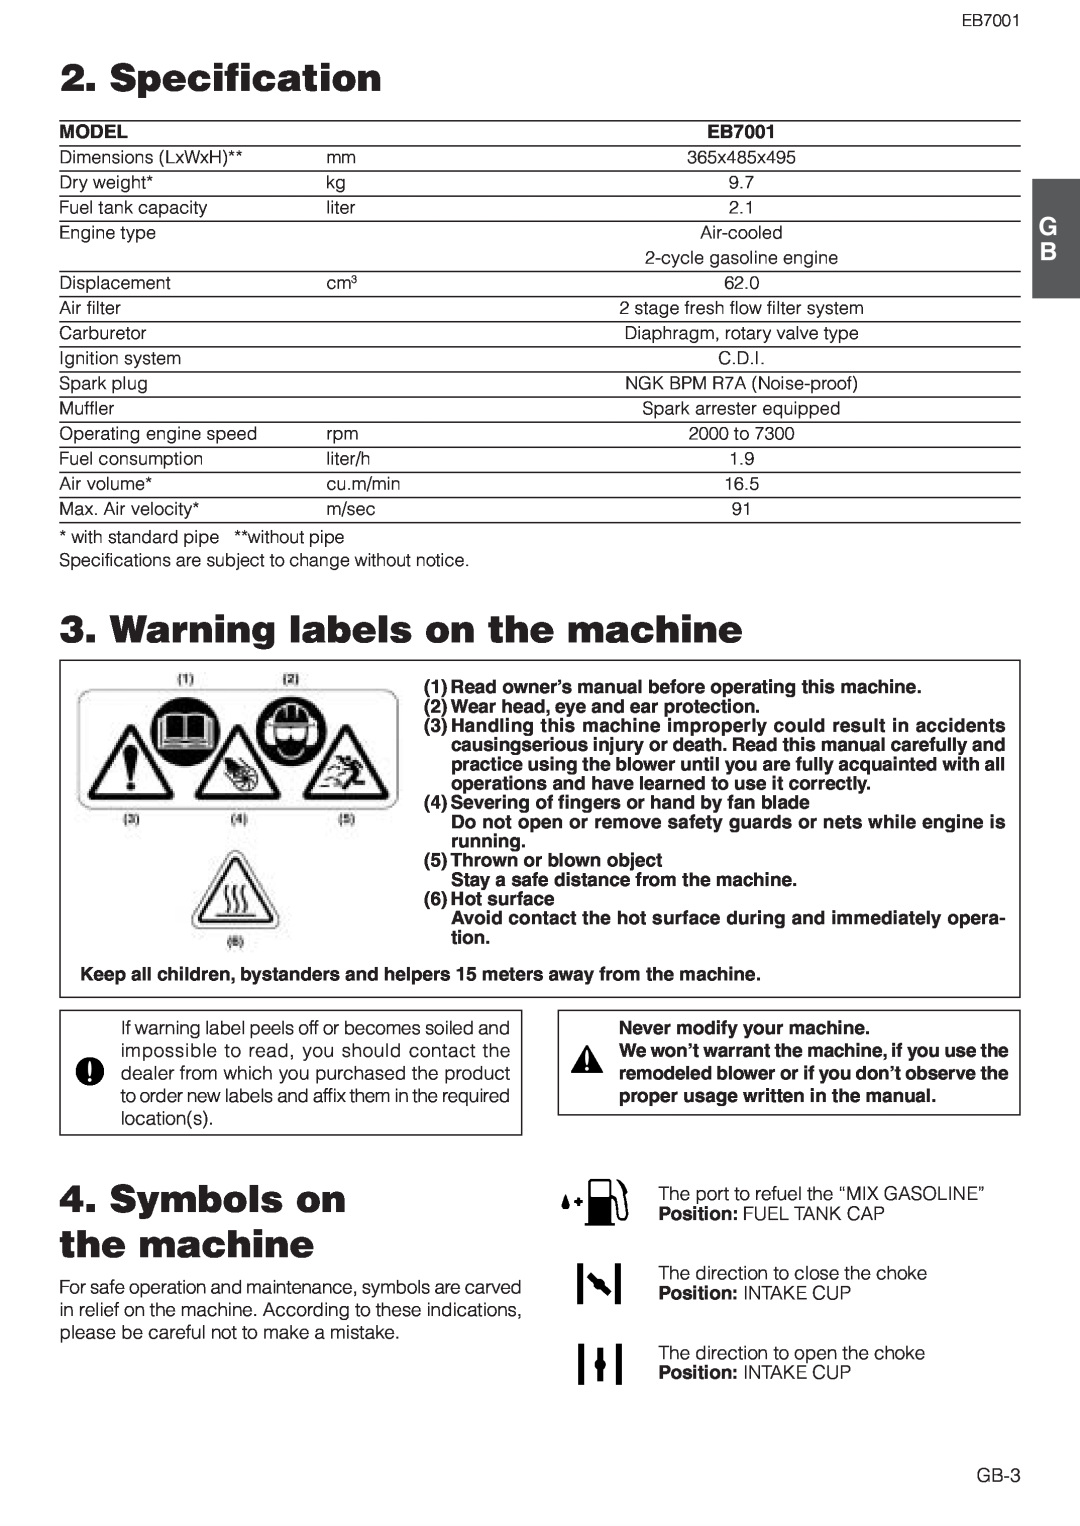 Zenoah EB7001 Specification, Warning labels on the machine, Symbols on the machine, Model, 5Thrown or blown object 